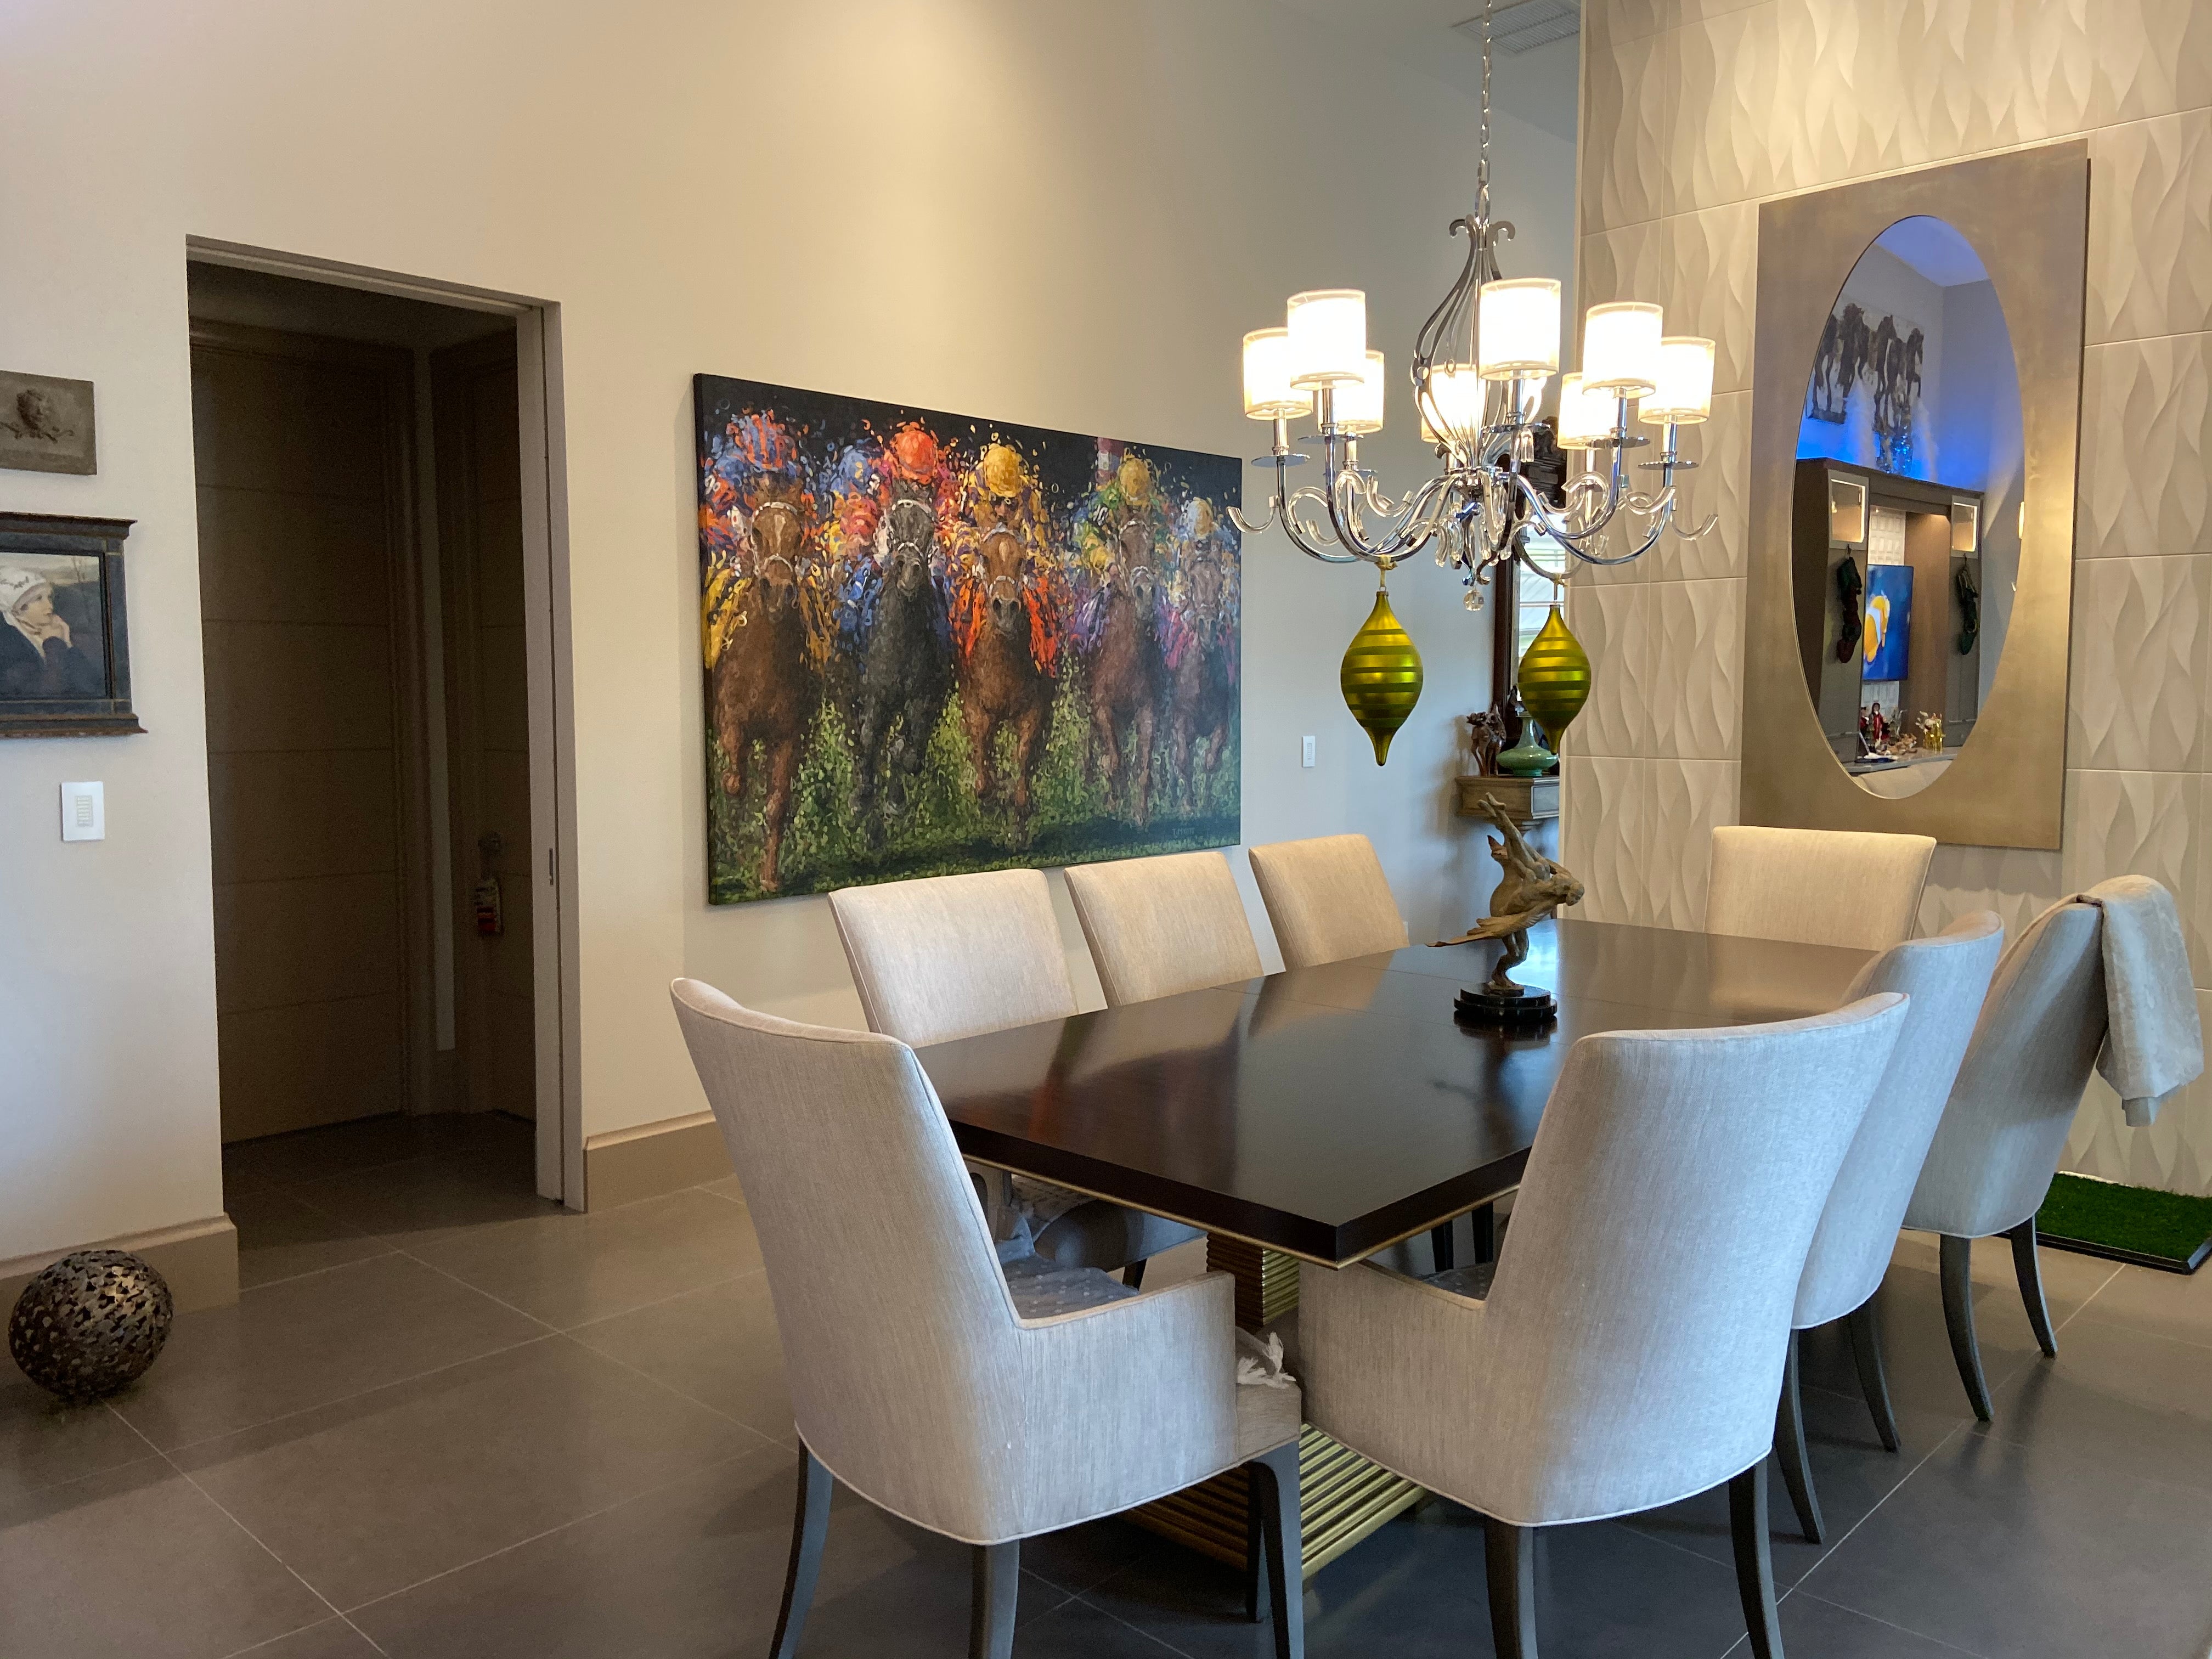 A contemporary dining room featuring a large, colorful painting by Tom Myott on the wall, depicting a vibrant horse race. The artwork's lively brushstrokes and rich colors complement the room's modern aesthetics, which include a sleek dark wood dining table surrounded by light fabric chairs. An elegant chandelier hangs above the table, and a decorative mirror on the opposite wall reflects the room's natural light. A sculpture centerpiece and a textured wall panel add to the sophistication of the space.